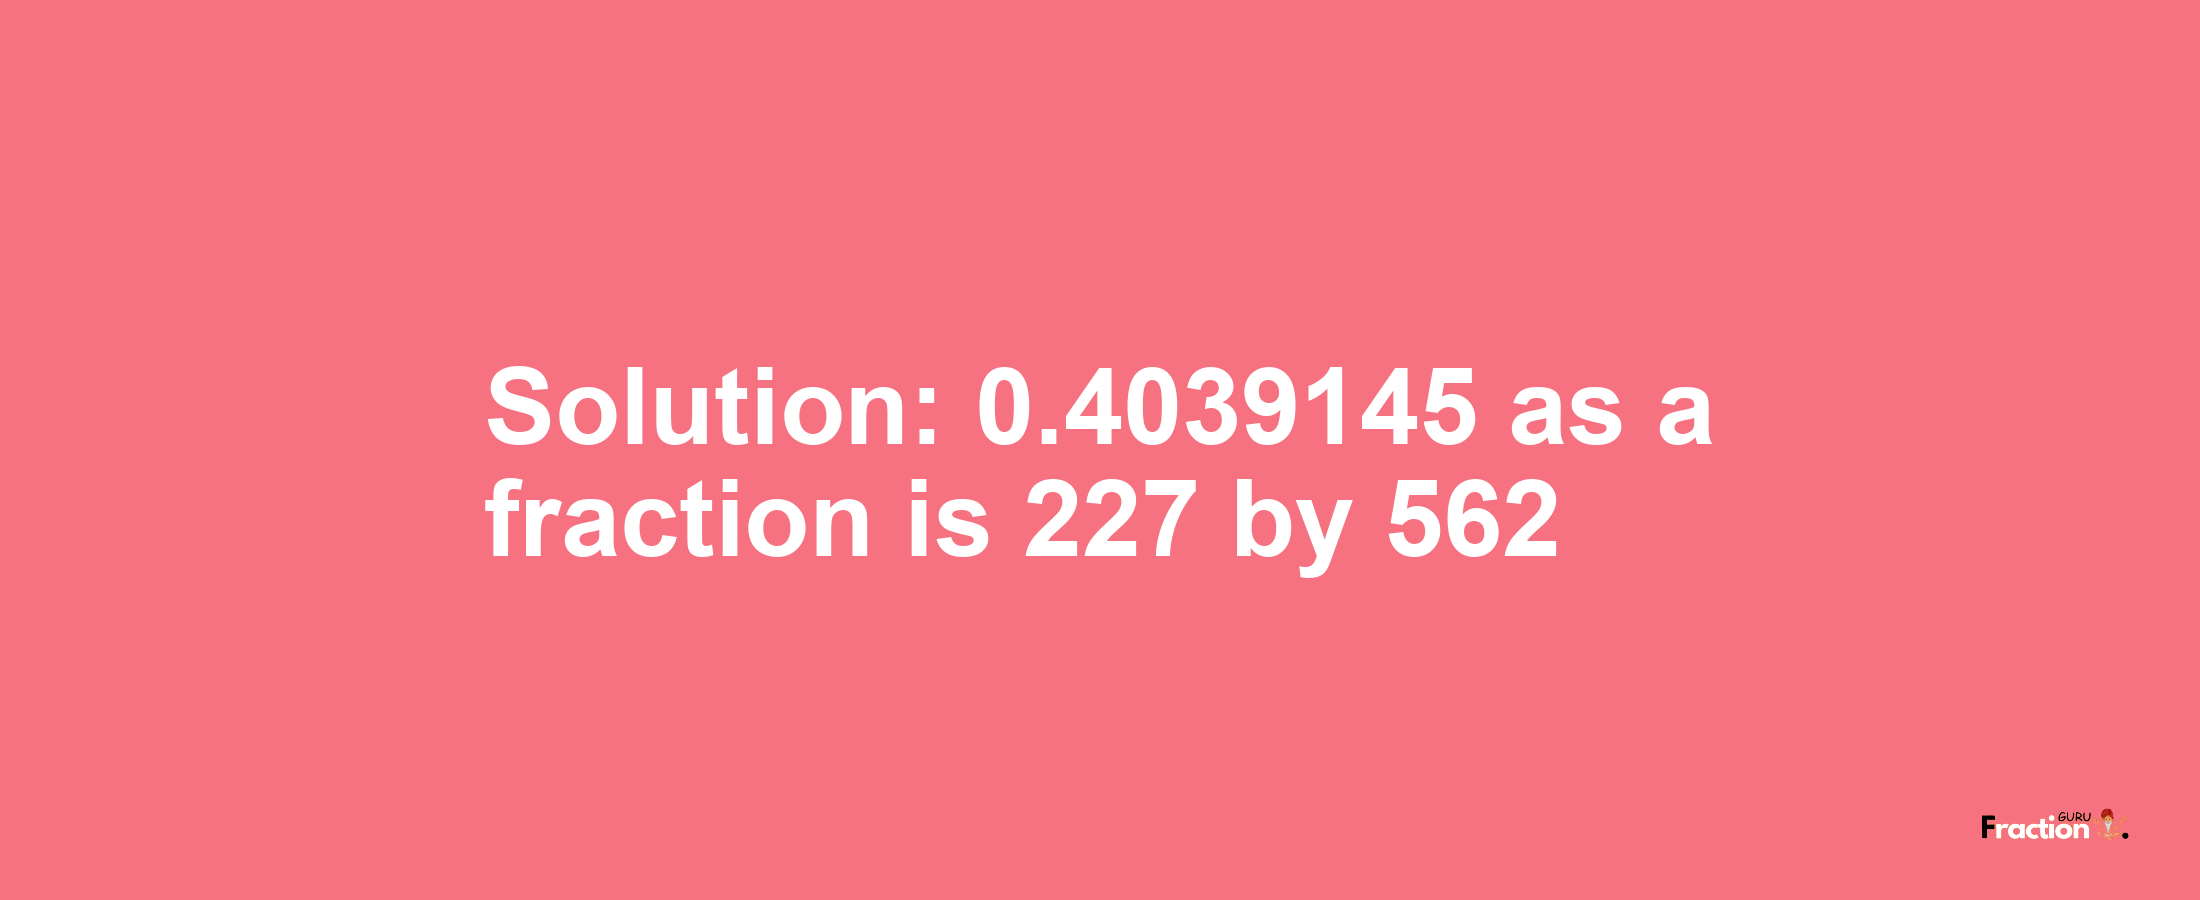 Solution:0.4039145 as a fraction is 227/562